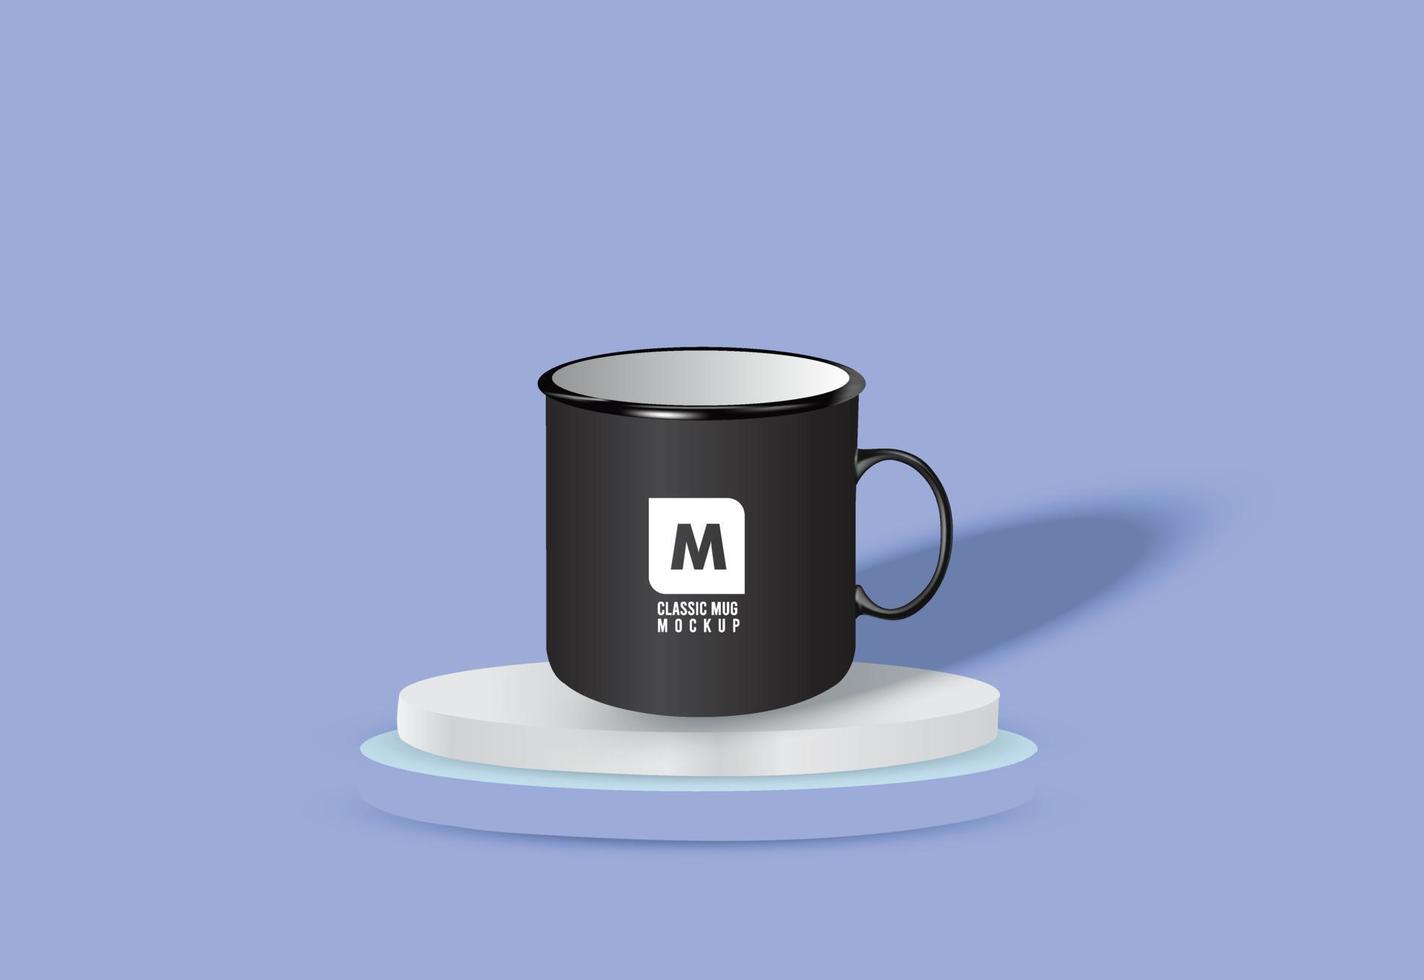 Ceramic coffee cup mug mockup design with a background vector